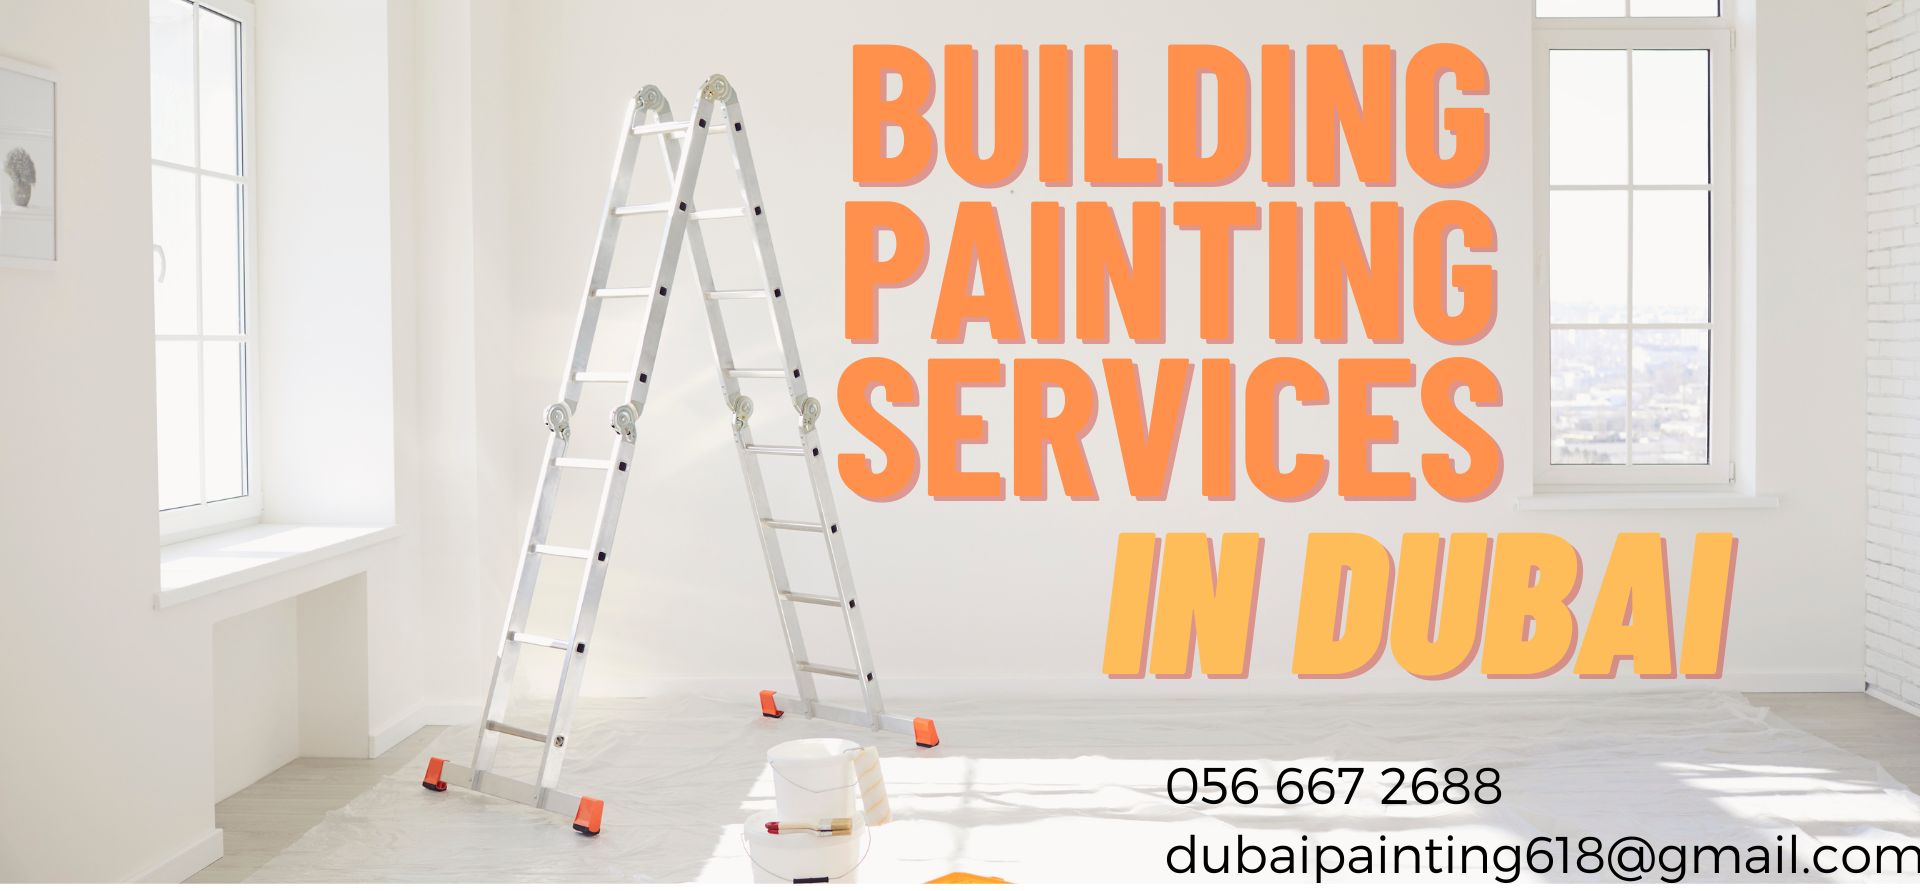 Building Painting services in Dubai